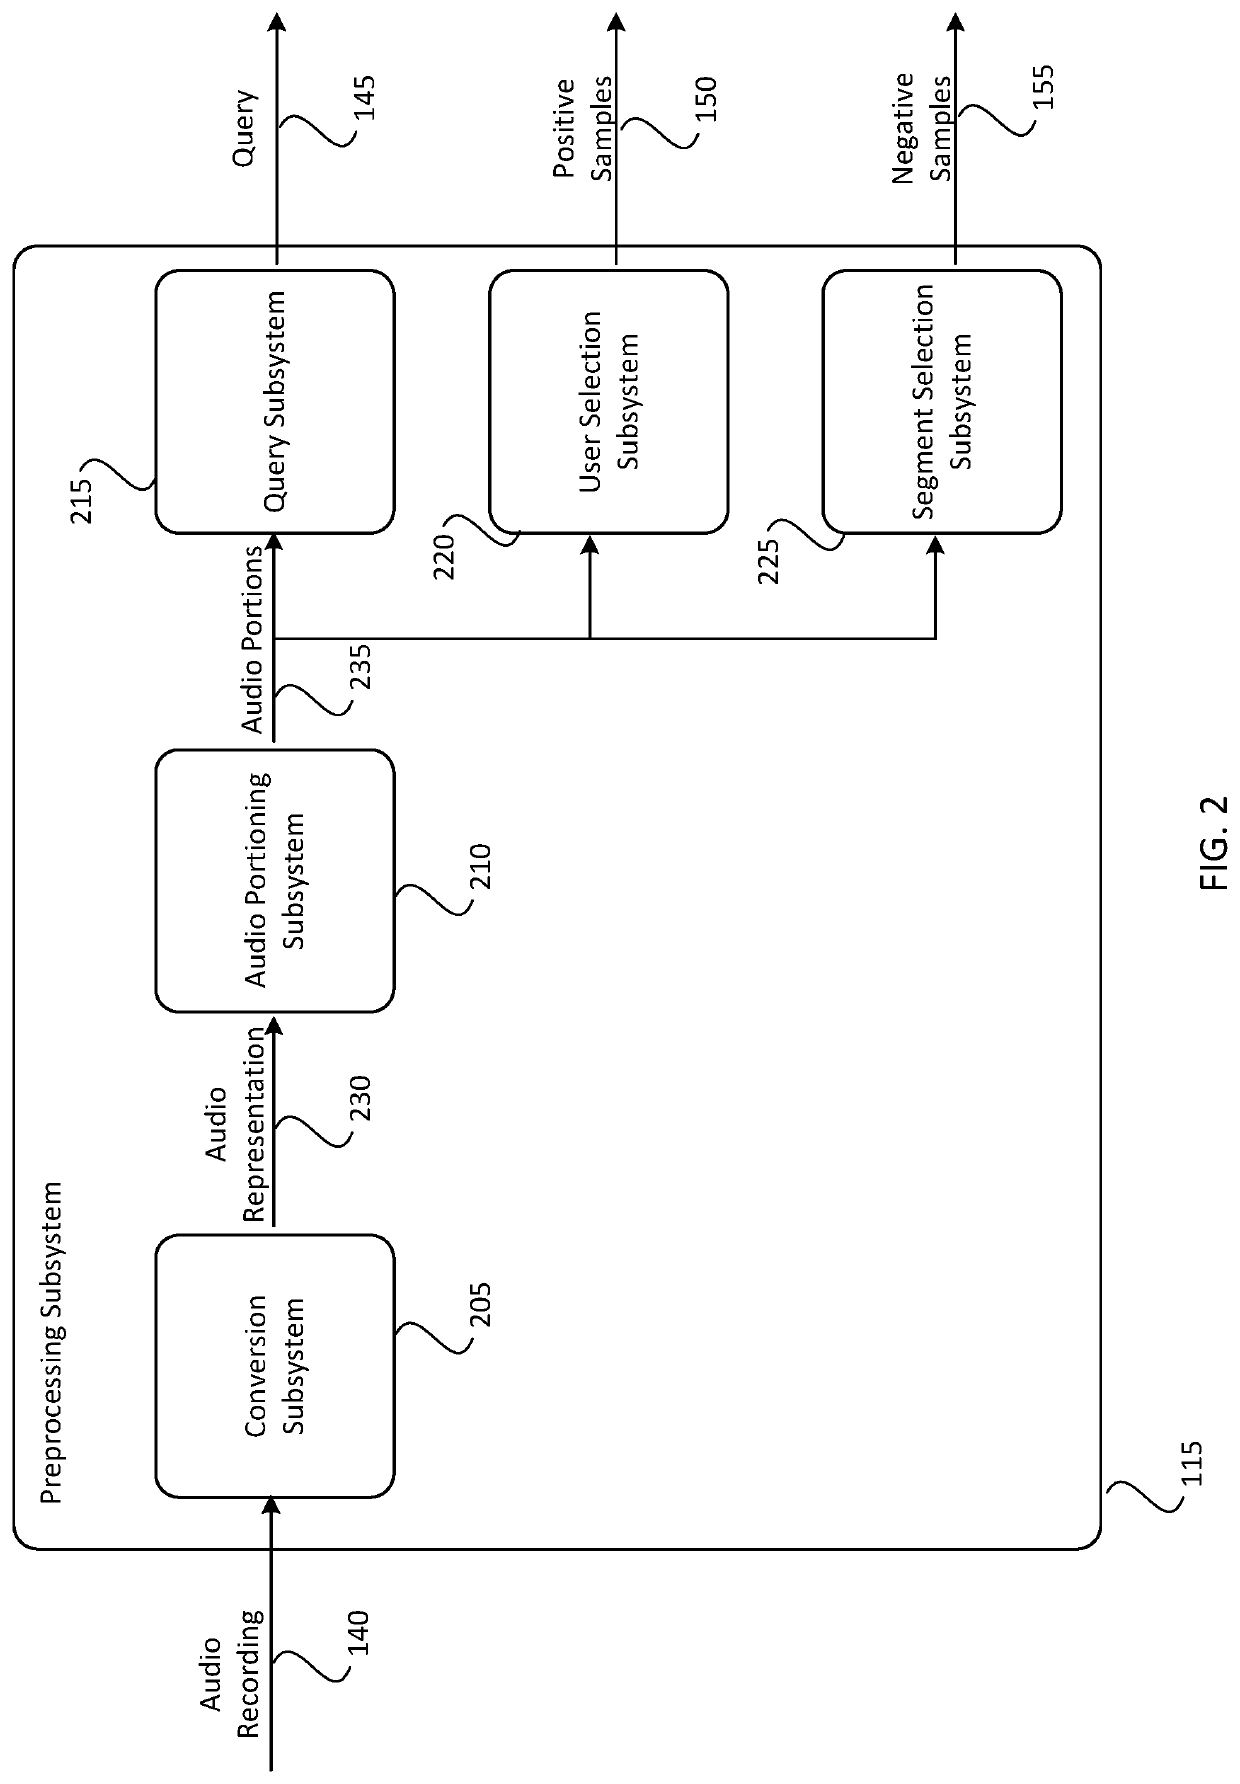 Automated sound matching within an audio recording